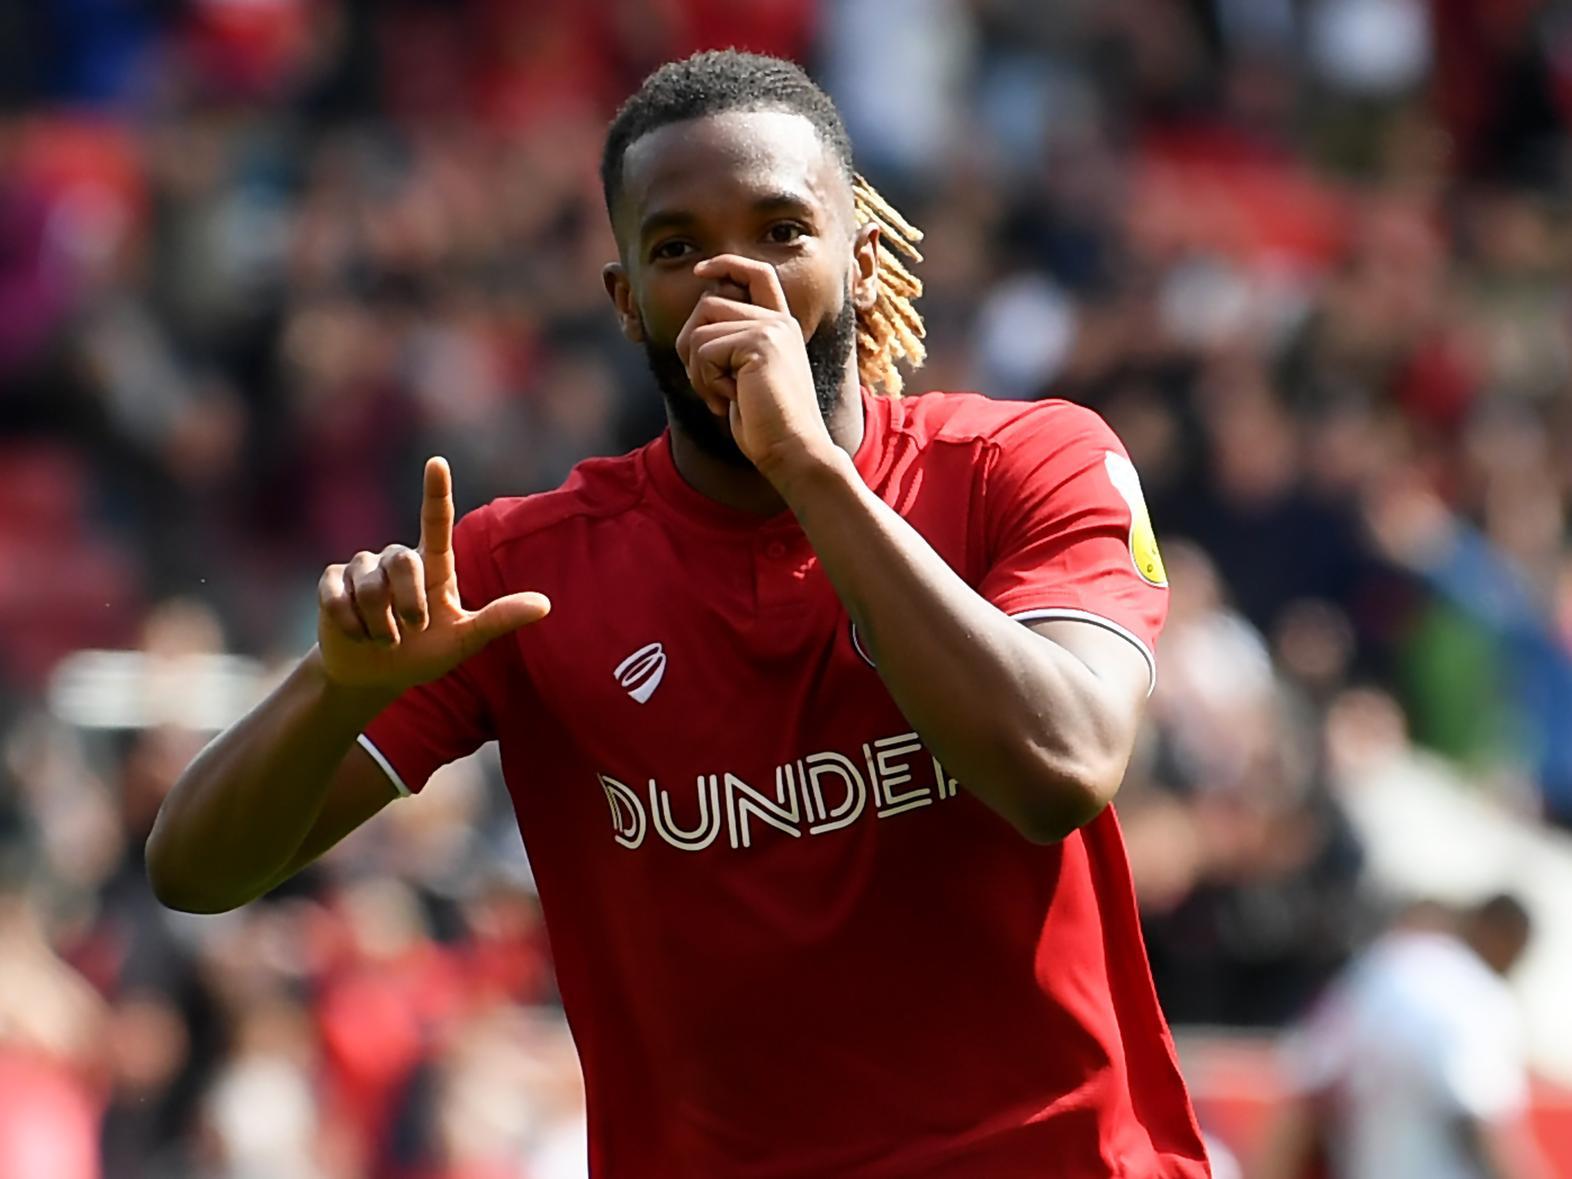 Swansea City could look to launch a loan move for Bristol City's Kasey Palmer next month, despite him just scoring once in 19 appearances for the Robins this season. (Sky Sports)